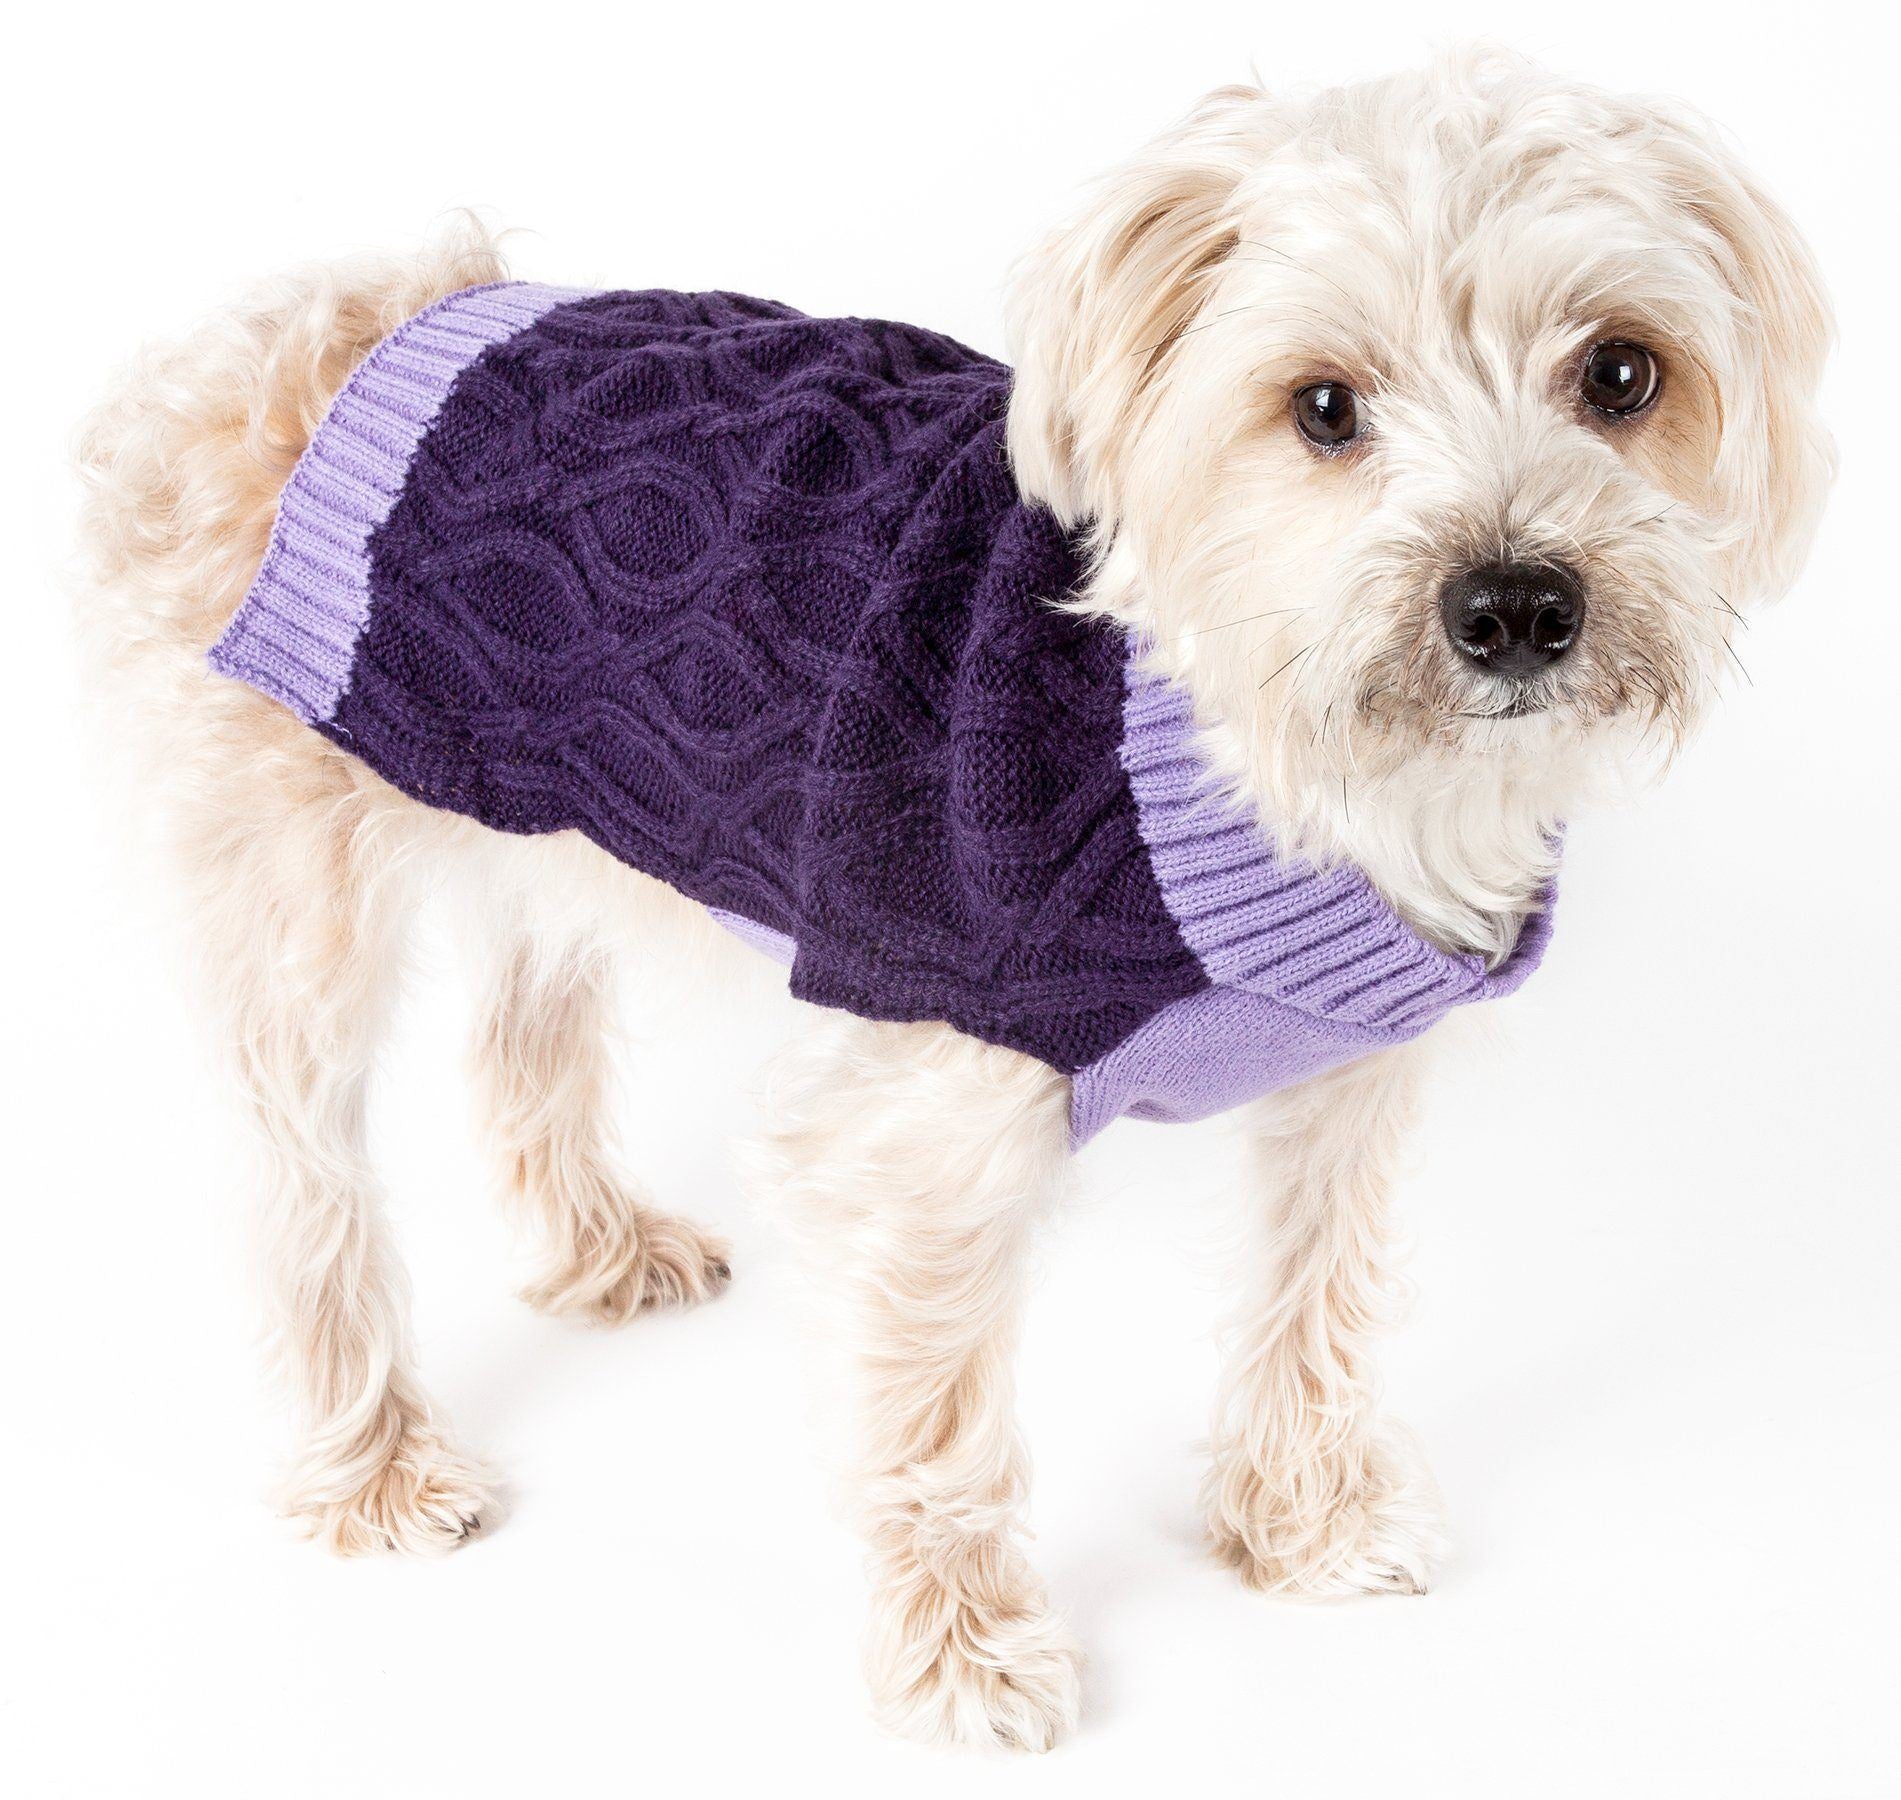 Pet Life ® Oval Weaved Heavy Knitted Fashion Designer Dog Sweater X-Small 